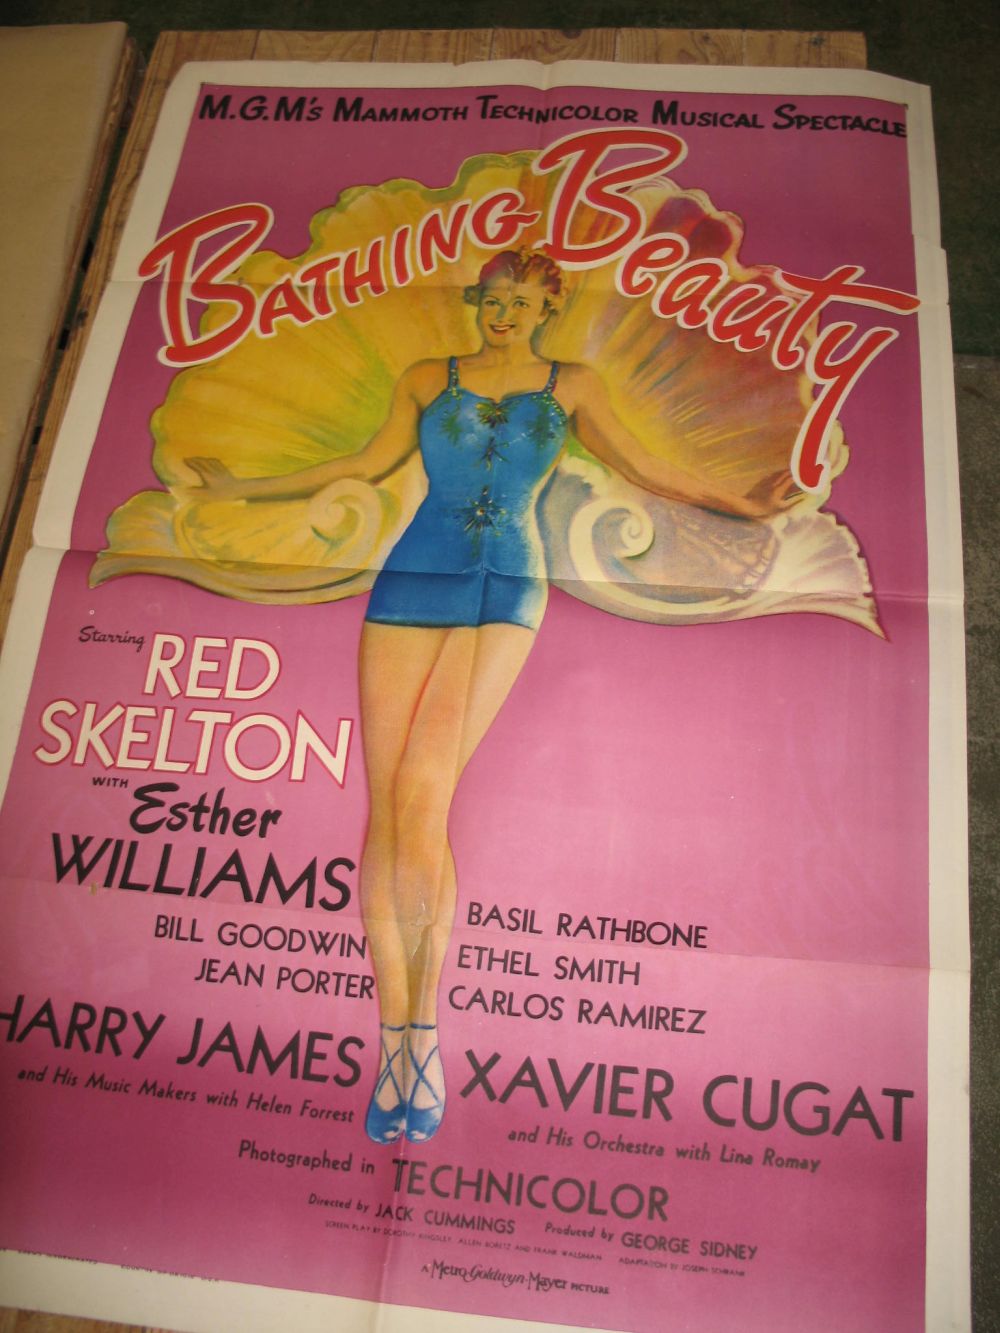 [FILM POSTER] Bathing Beauty, USA copyright 1944, folds, 41 x 27 inches (some tears and splits).